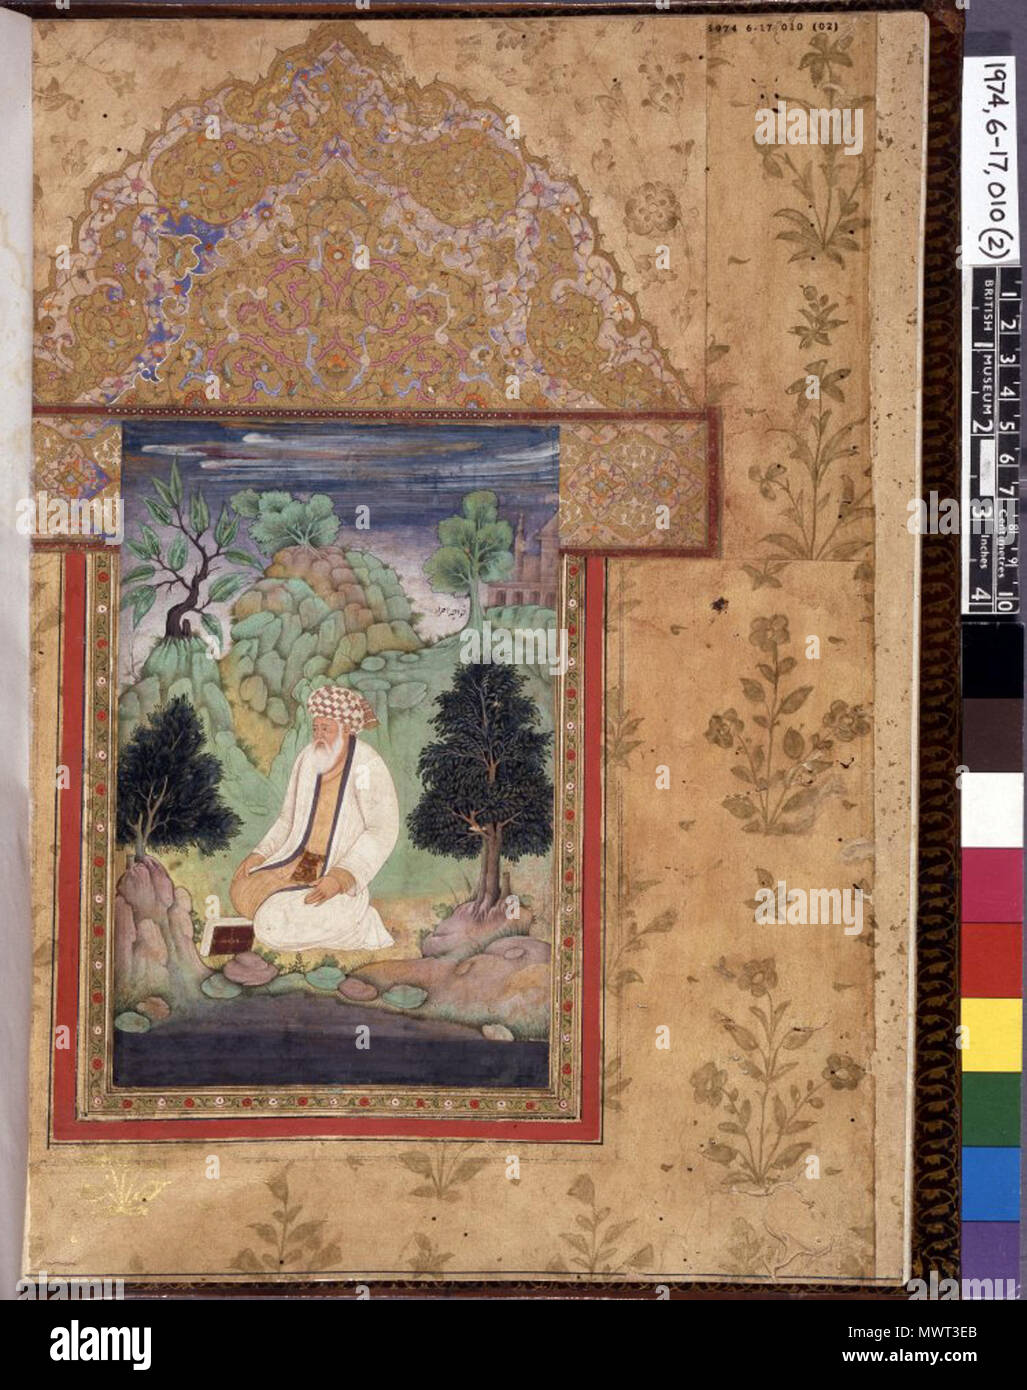 . English: Album Leaf (verso), painting on paper. Devotion. Shaykh Khwaja Ahrar seated by a stream. Inscribed. According to register, folio 1. See 1974,0617,0.10 for album description. 17thC 19thC. Khwajeh Awár 555 Shaykh Khwaja Ahrar Stock Photo